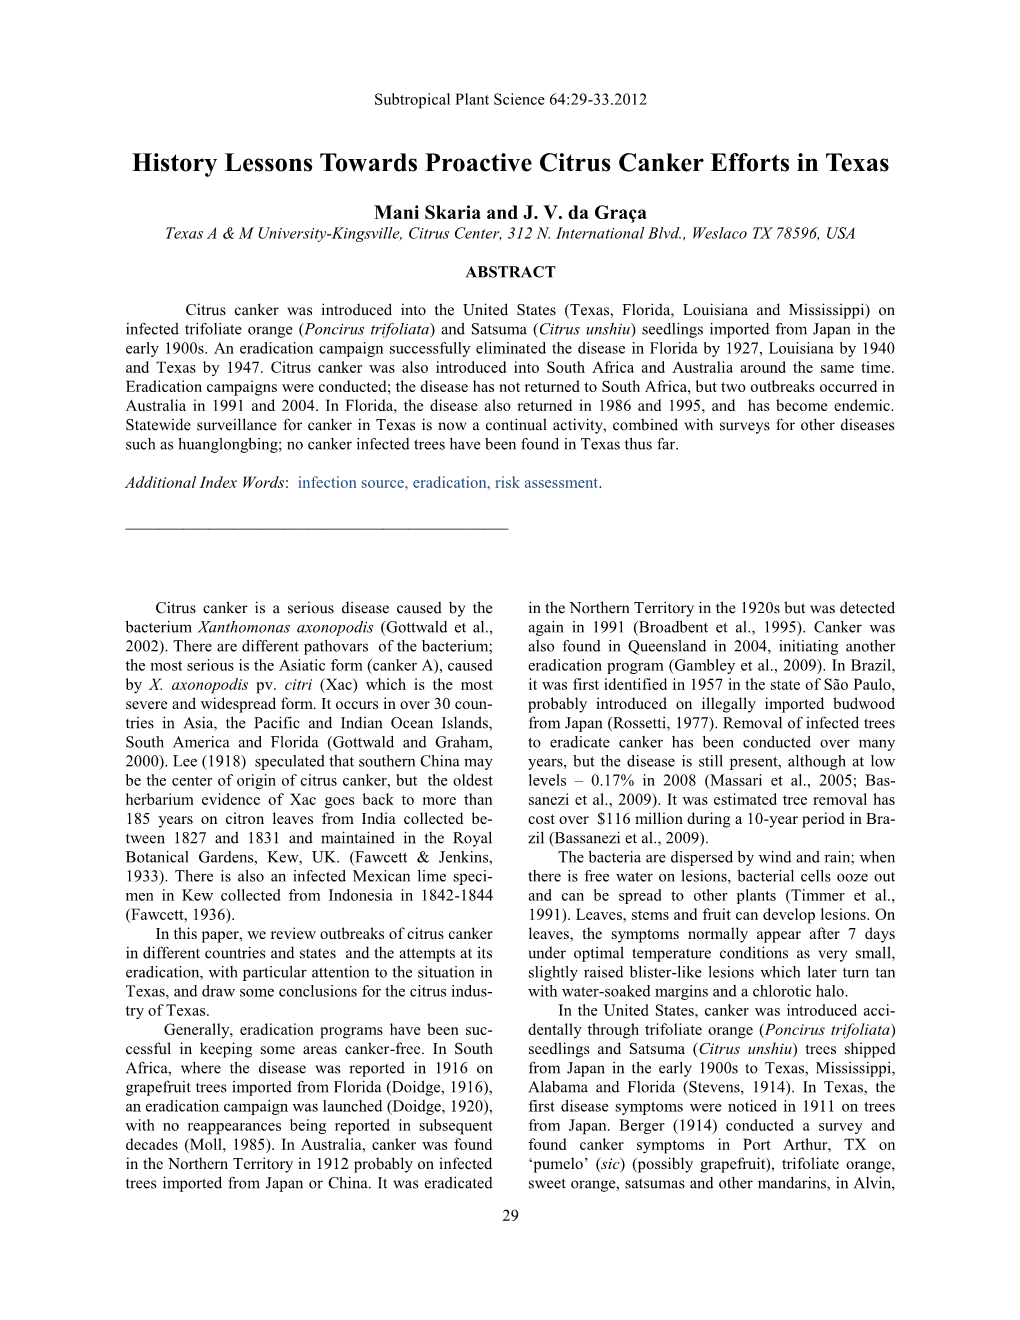 History Lessons Towards Proactive Citrus Canker Efforts in Texas